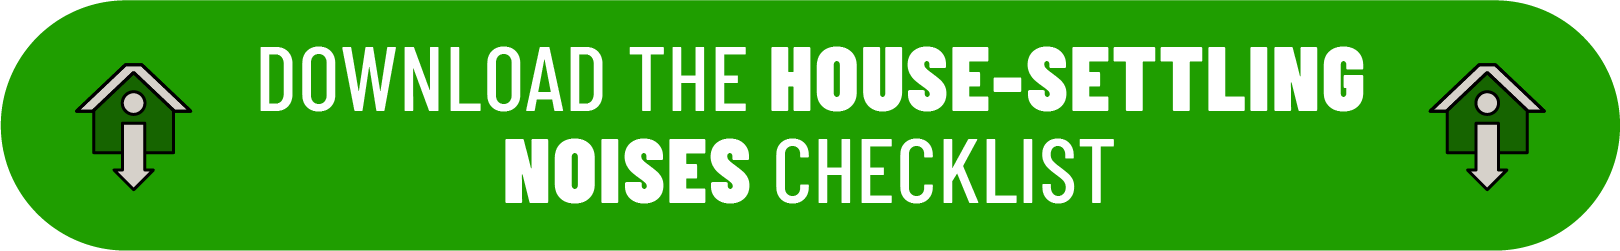 download the house-settling noises checklist